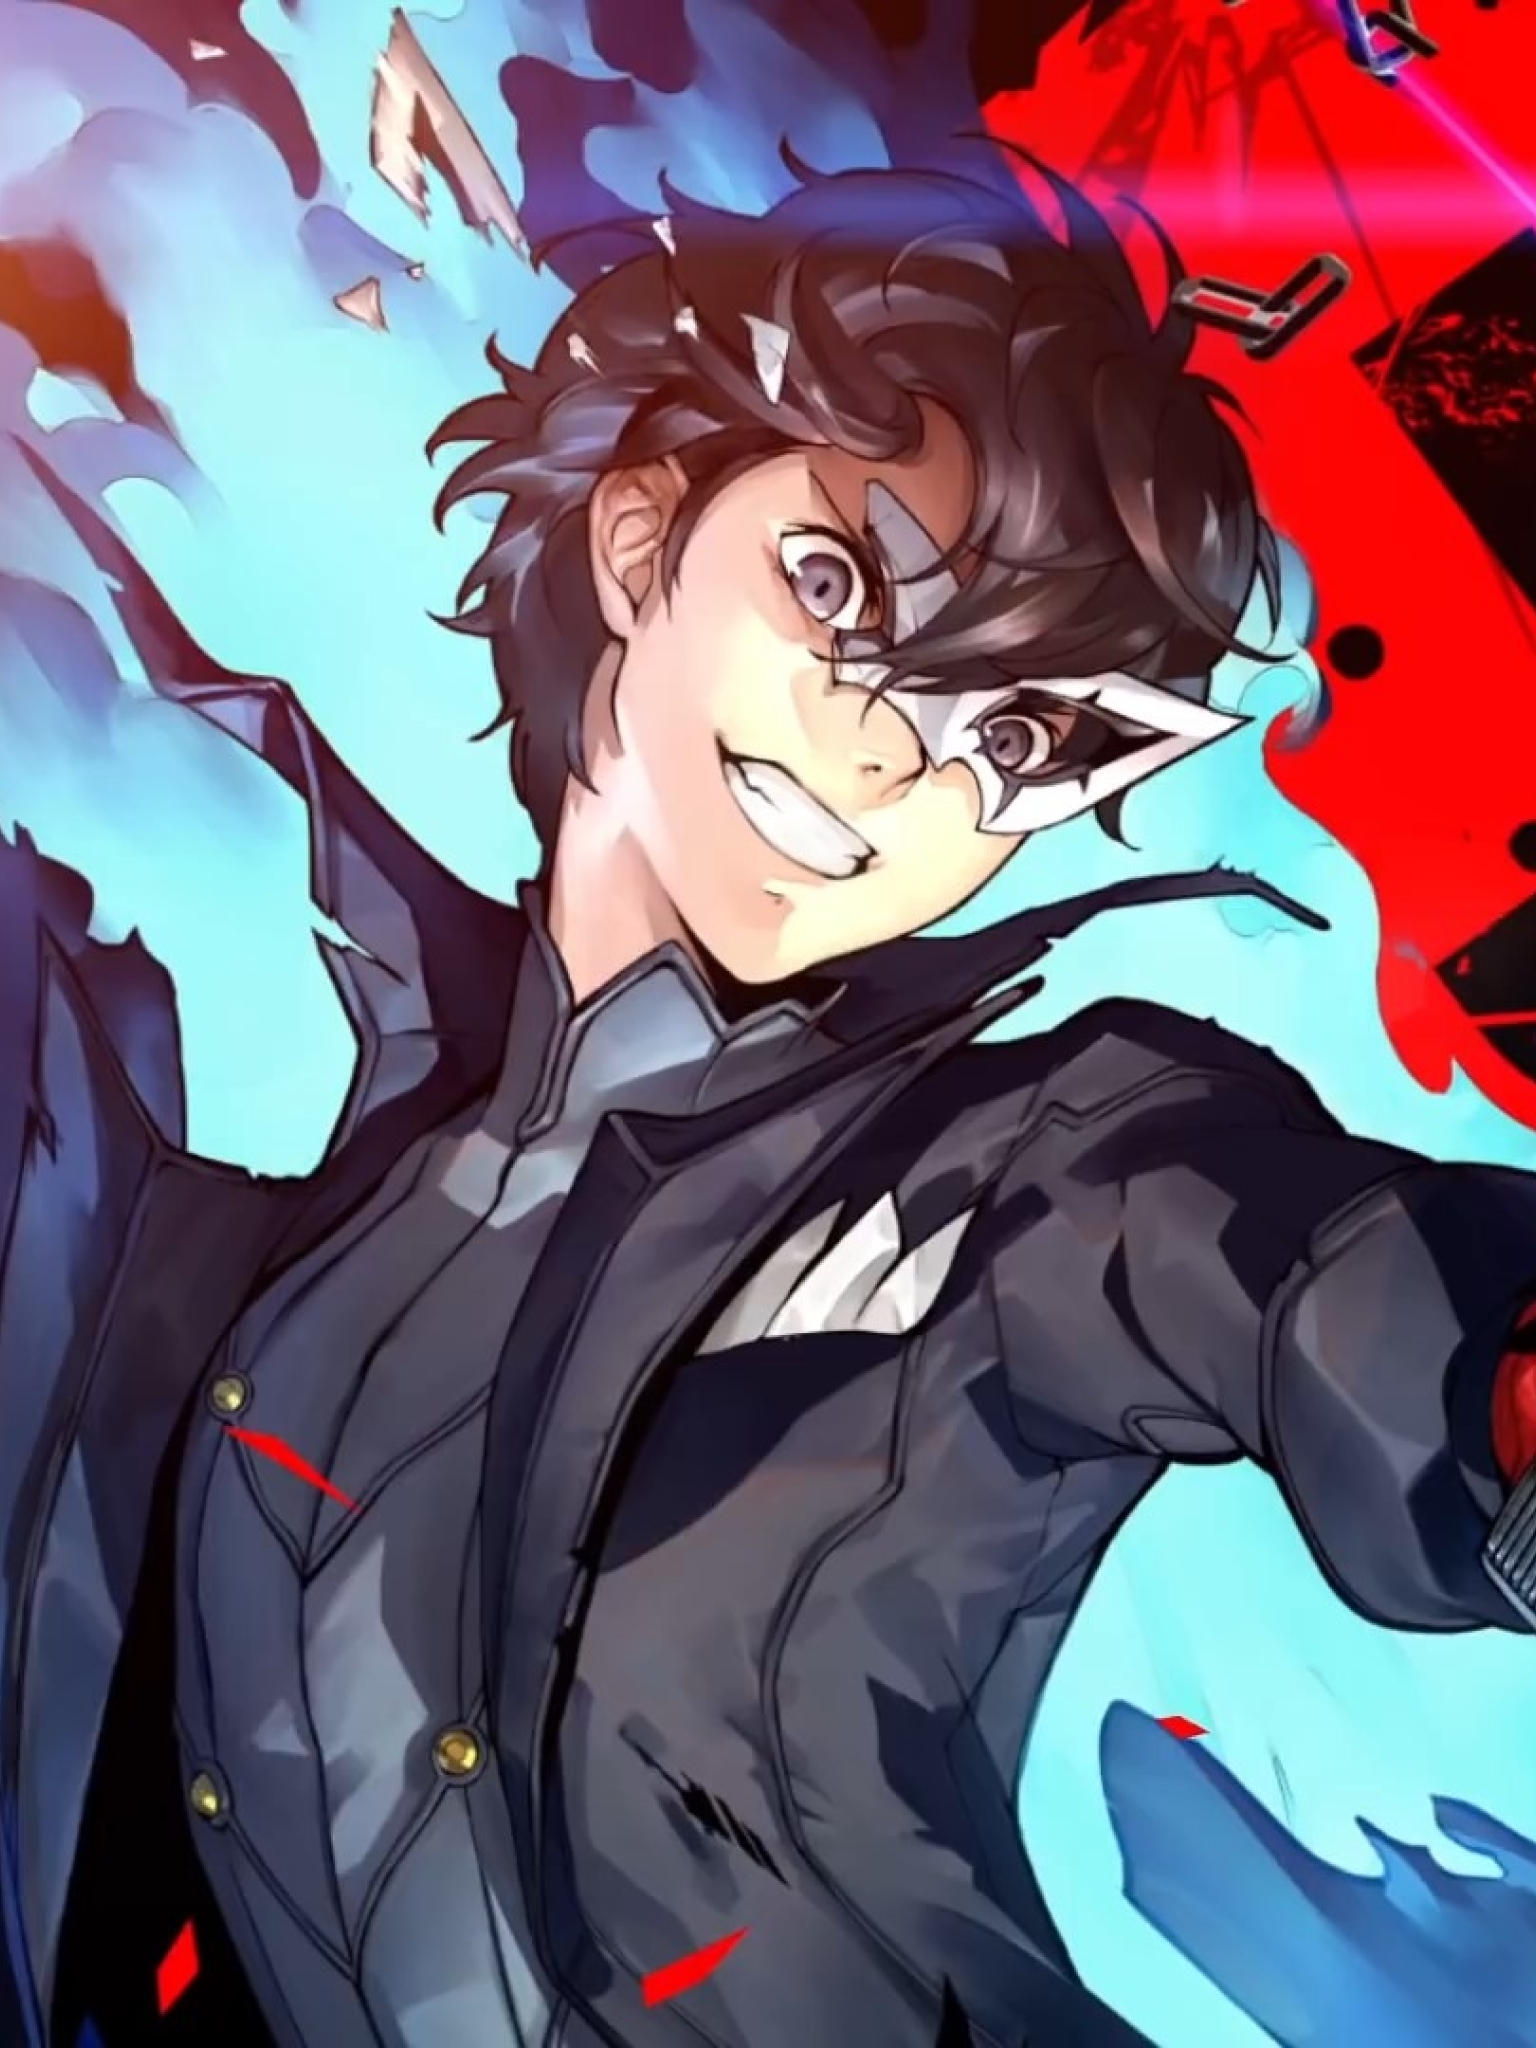 1536x48 Joker Persona 5 Scramble The Phantom Strikers 1536x48 Resolution Wallpaper Hd Games 4k Wallpapers Images Photos And Background